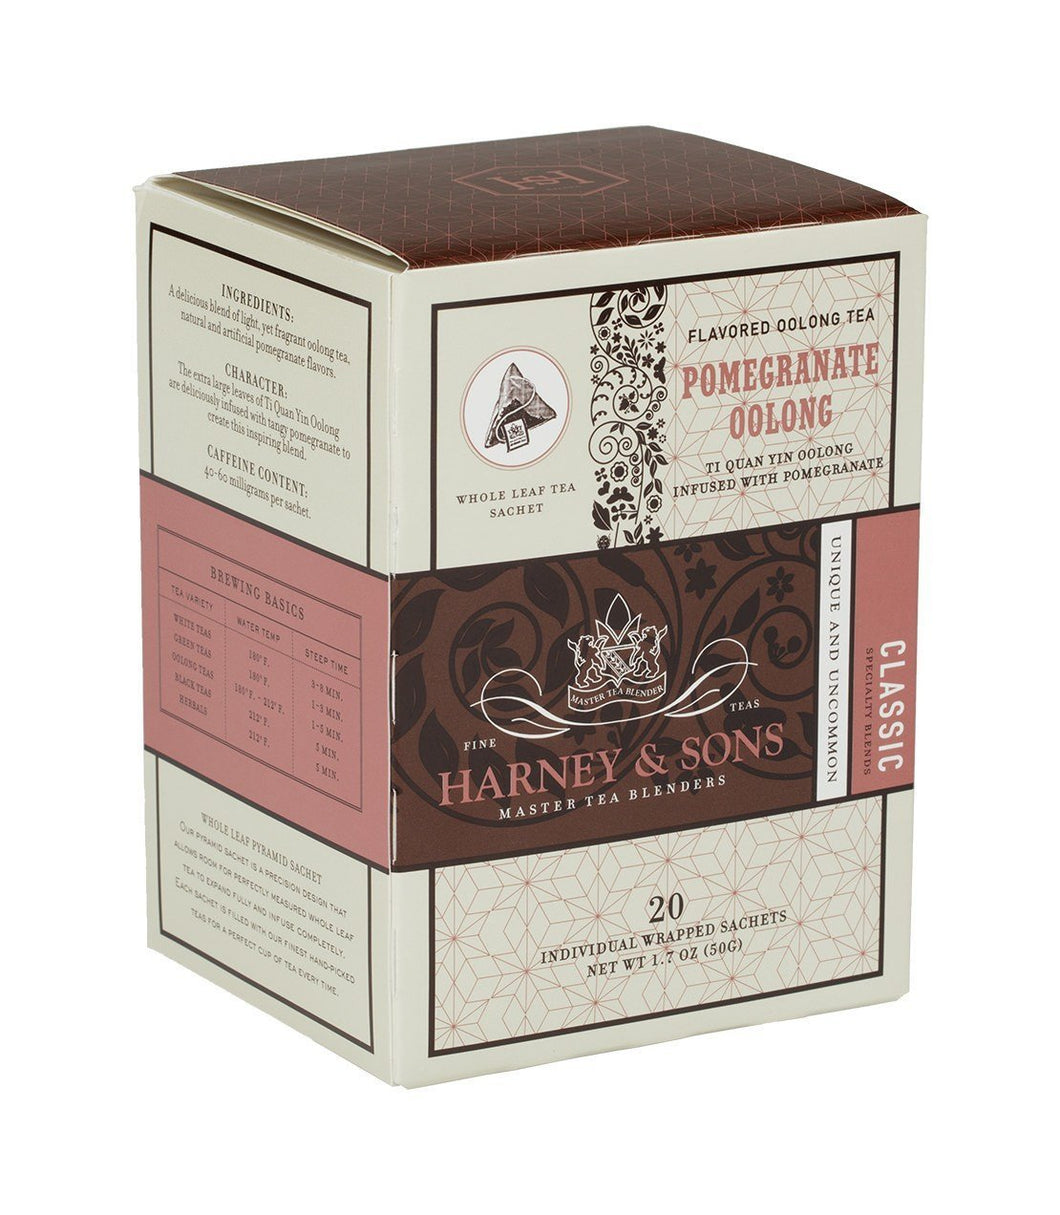 Harney & Sons - Pomegranate Oolong